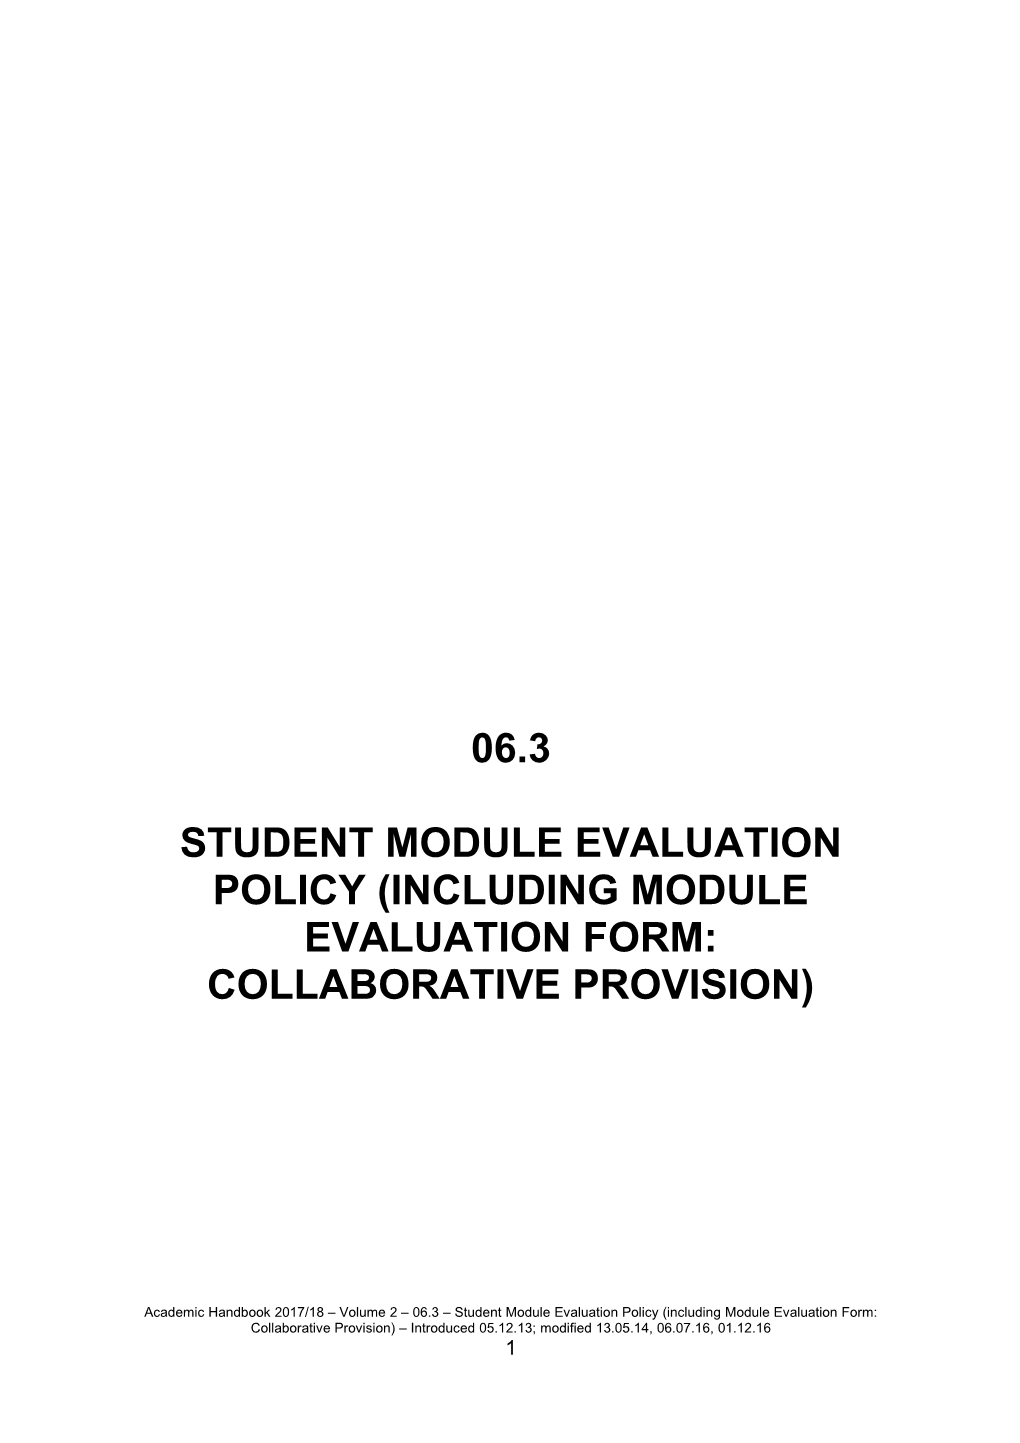 Student Module Evaluation Policy (Including Module Evaluation Form: Collaborative Provision)